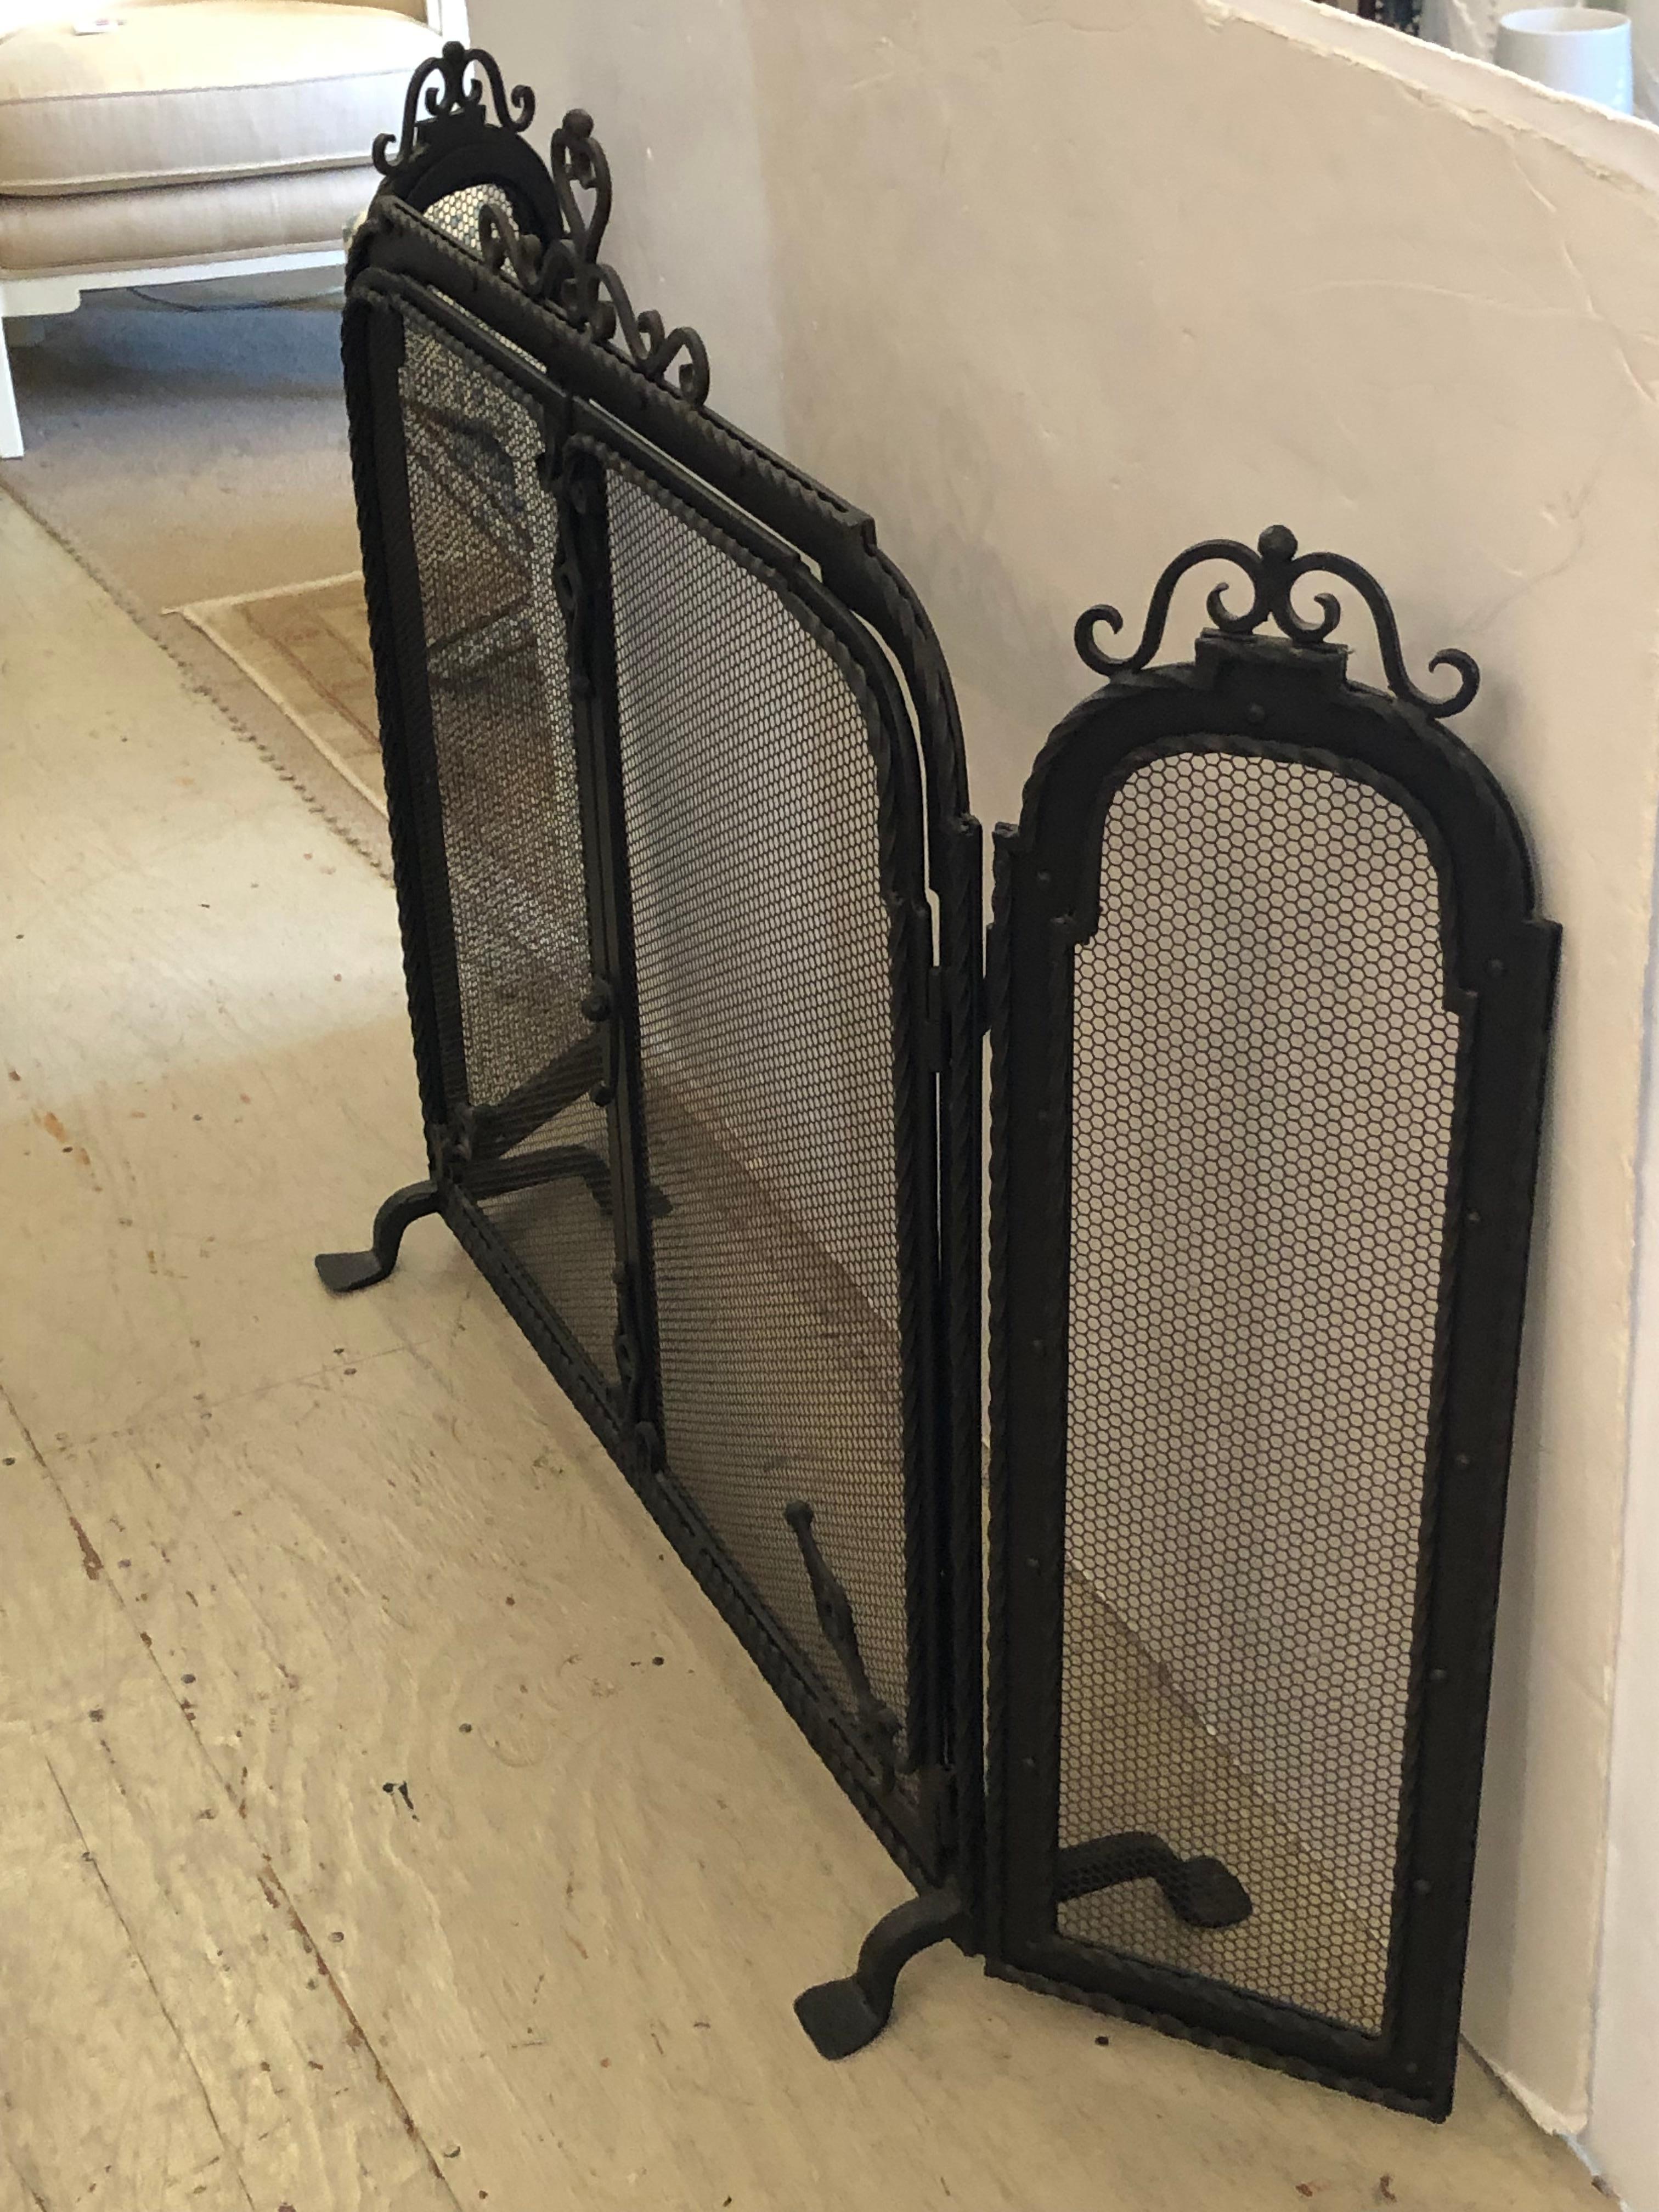 Mid-20th Century Spectacular 3 Piece Wrought Iron and Mesh Fireplace Screen with Doors For Sale